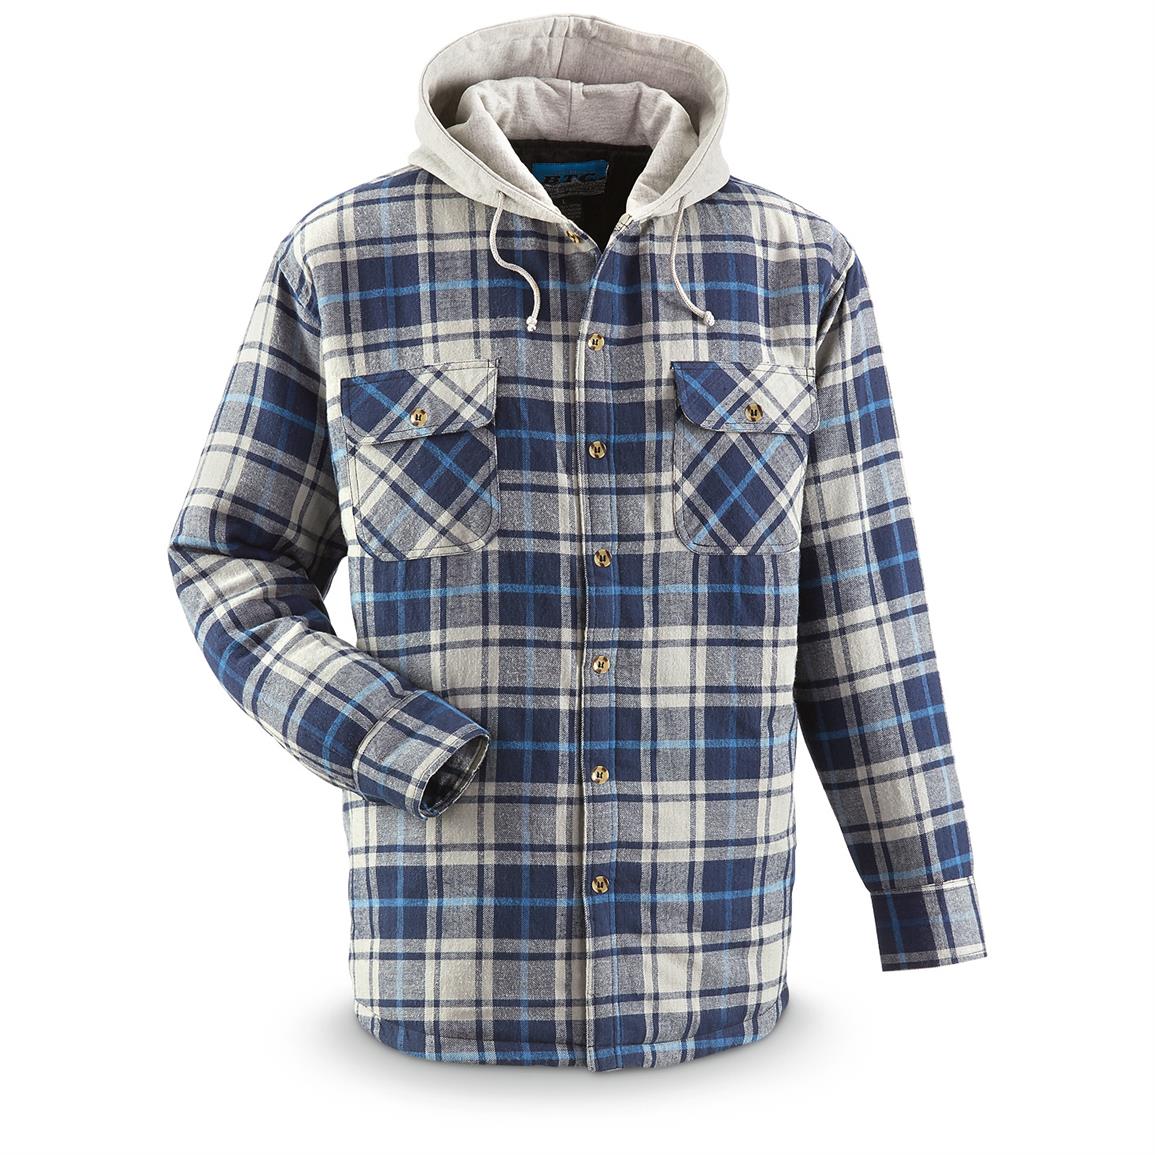 Men's Quilt-Lined Hooded Flannel Shirt - 665227, Shirts at Sportsman's